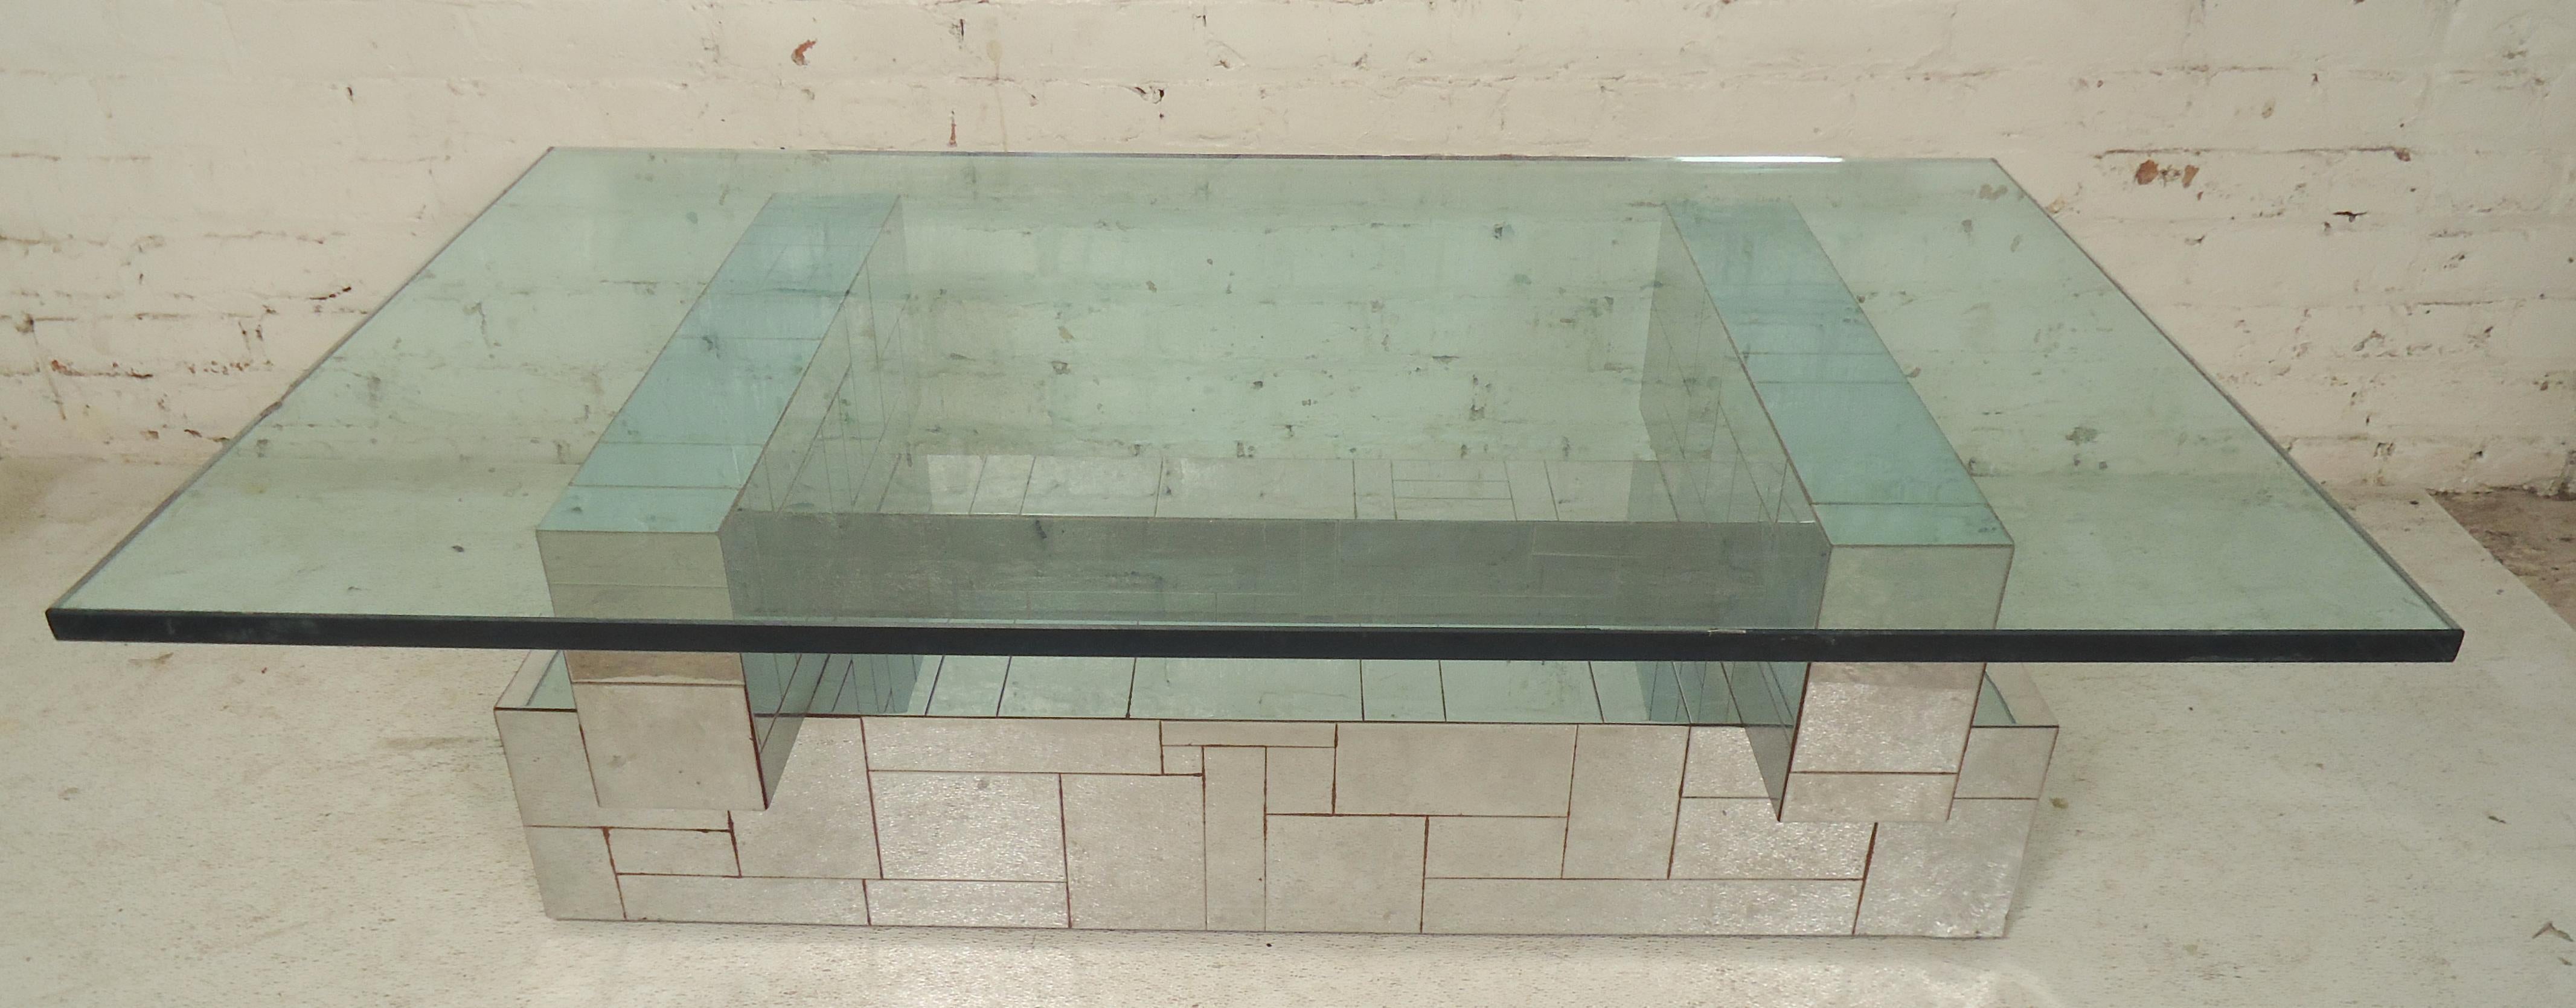 Handsome chrome platted table base with thick glass top by Paul Evans for his Cityscape line.

(Please confirm item location - NY or NJ - with dealer).
  